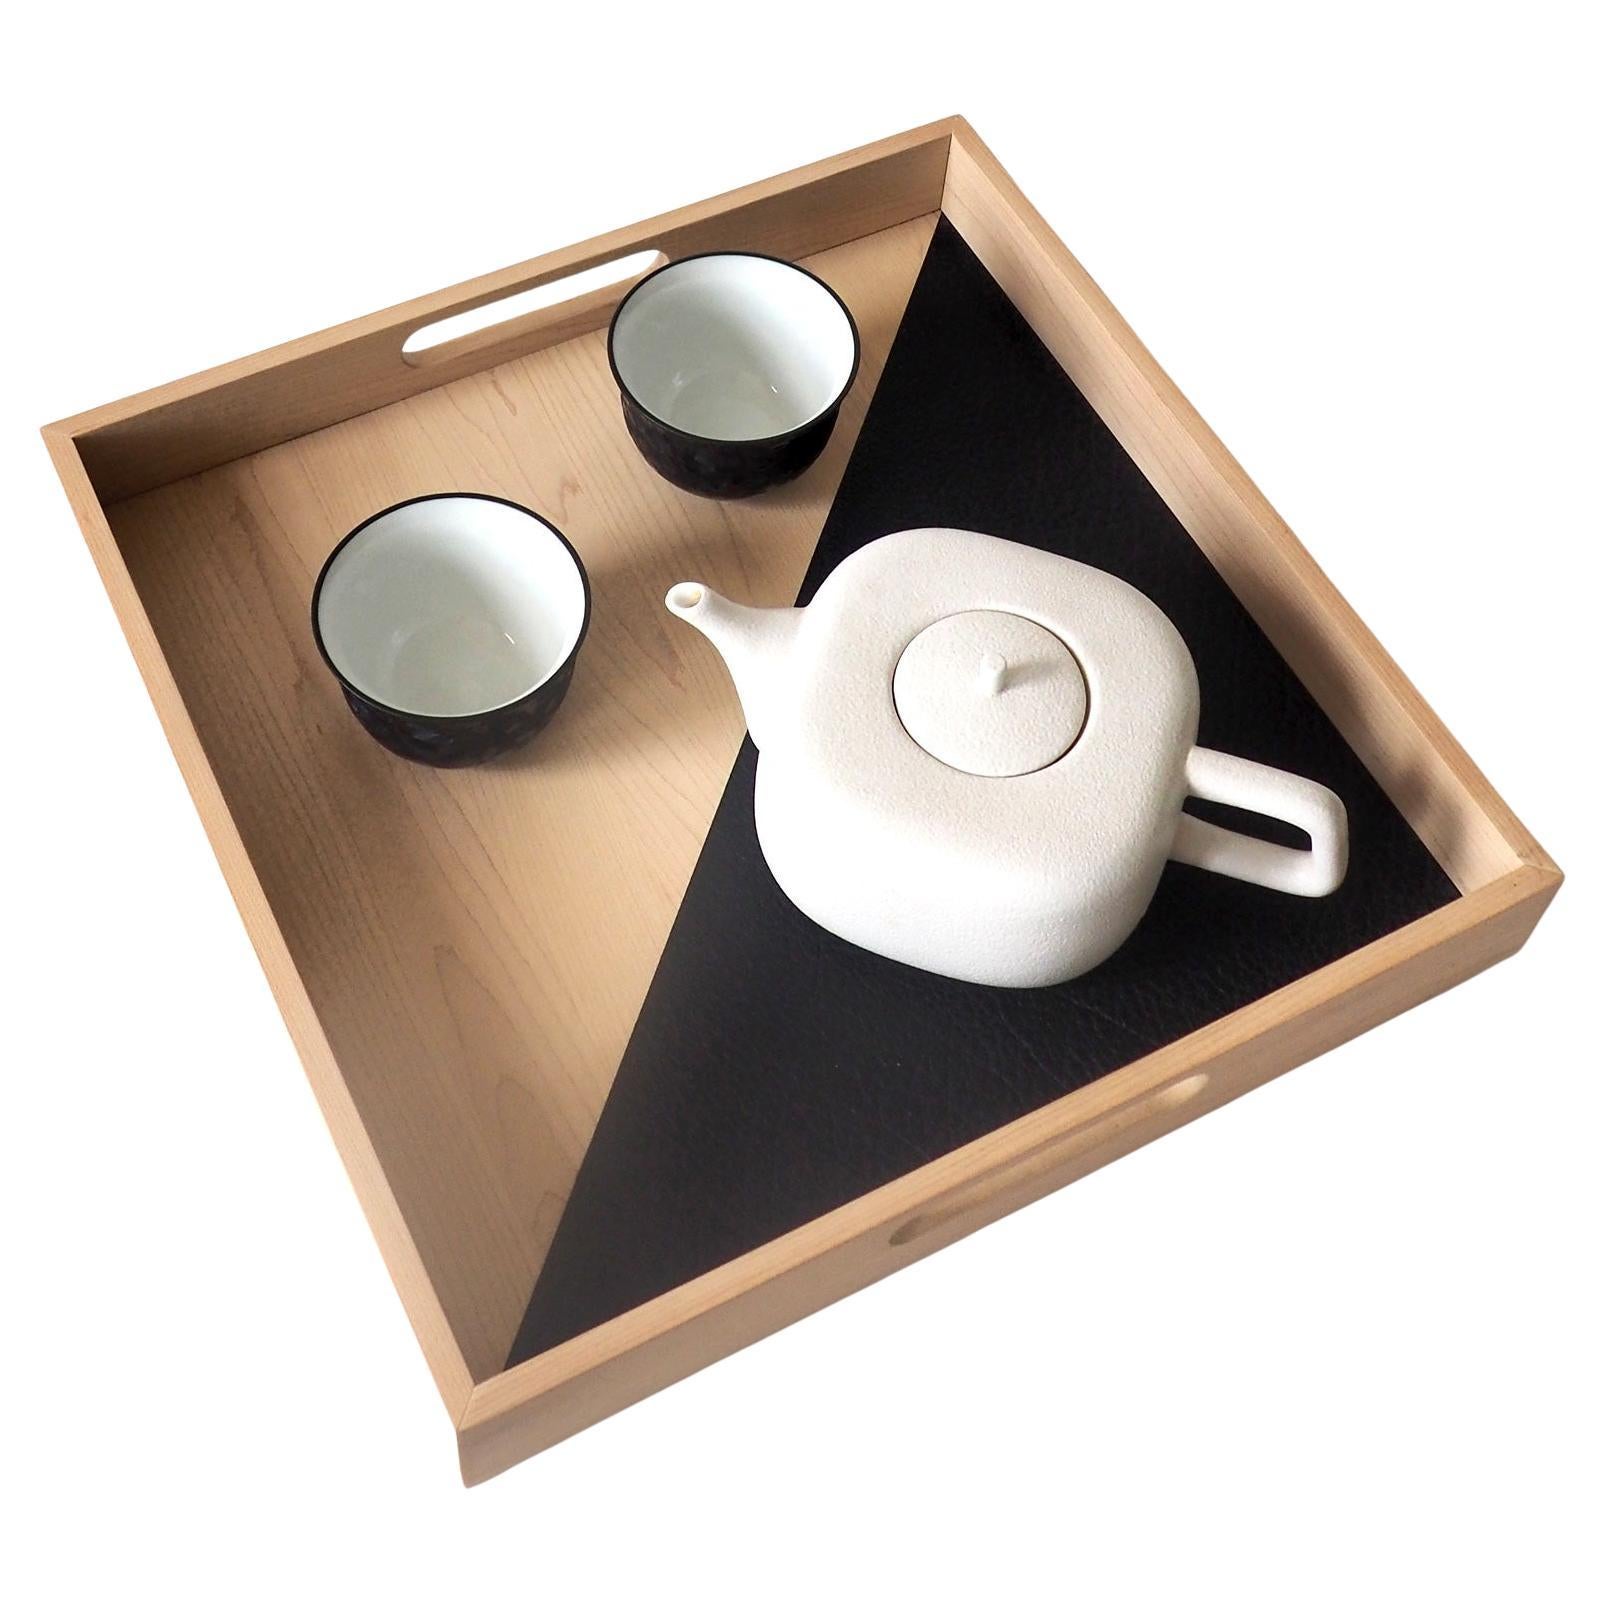 "After Hours" Square tray in maple and black leather by Atelier C.u.b For Sale